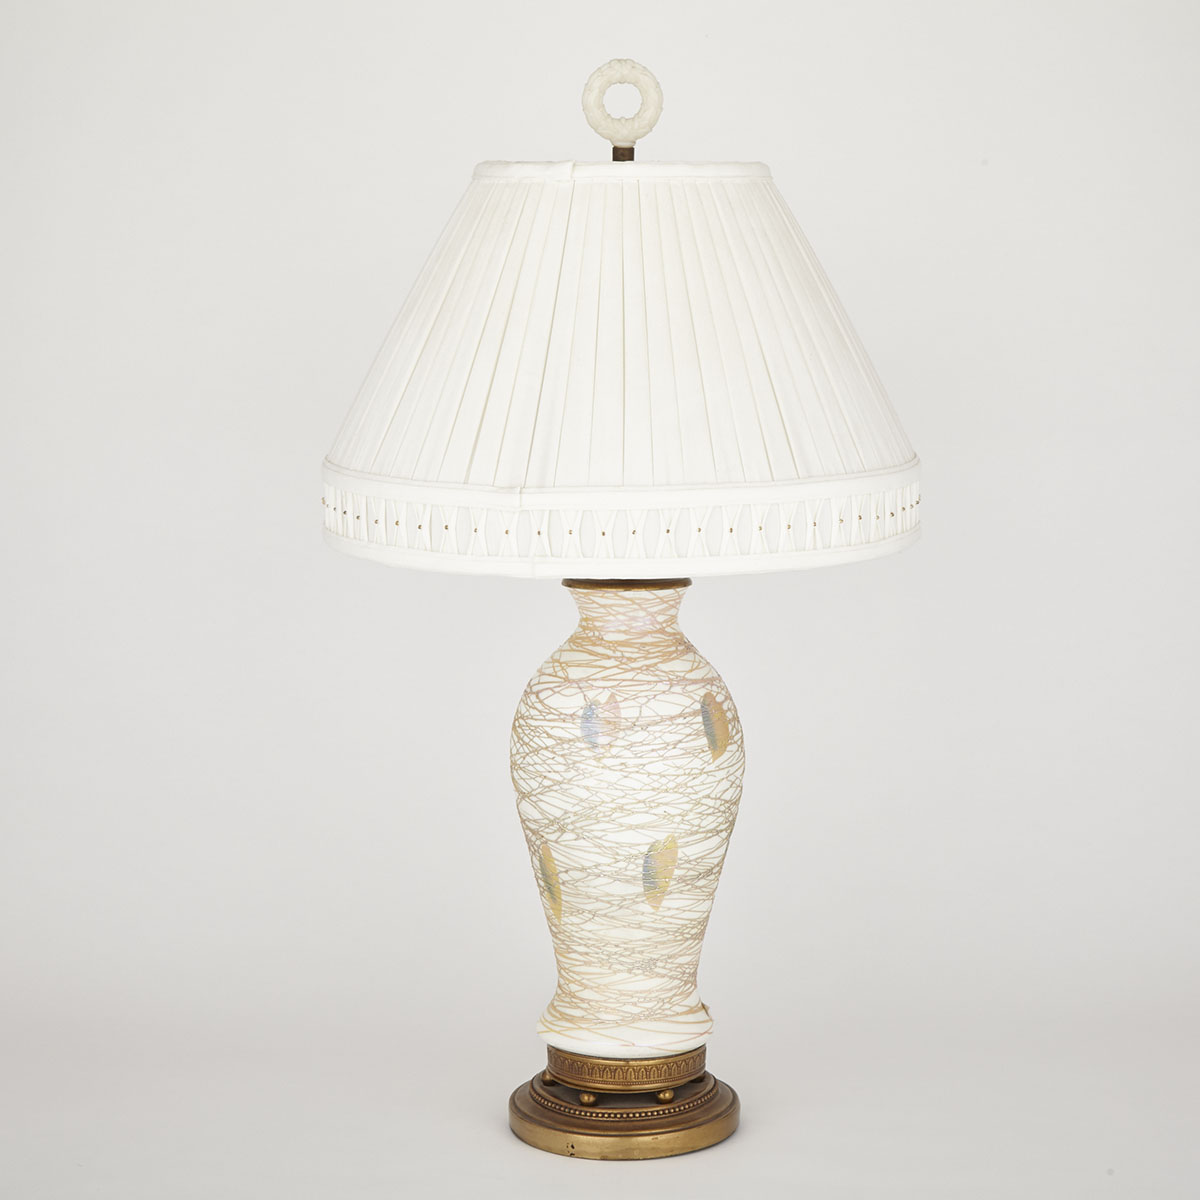 American Iridescent Glass Table Lamp, probably Durand, early 20th century